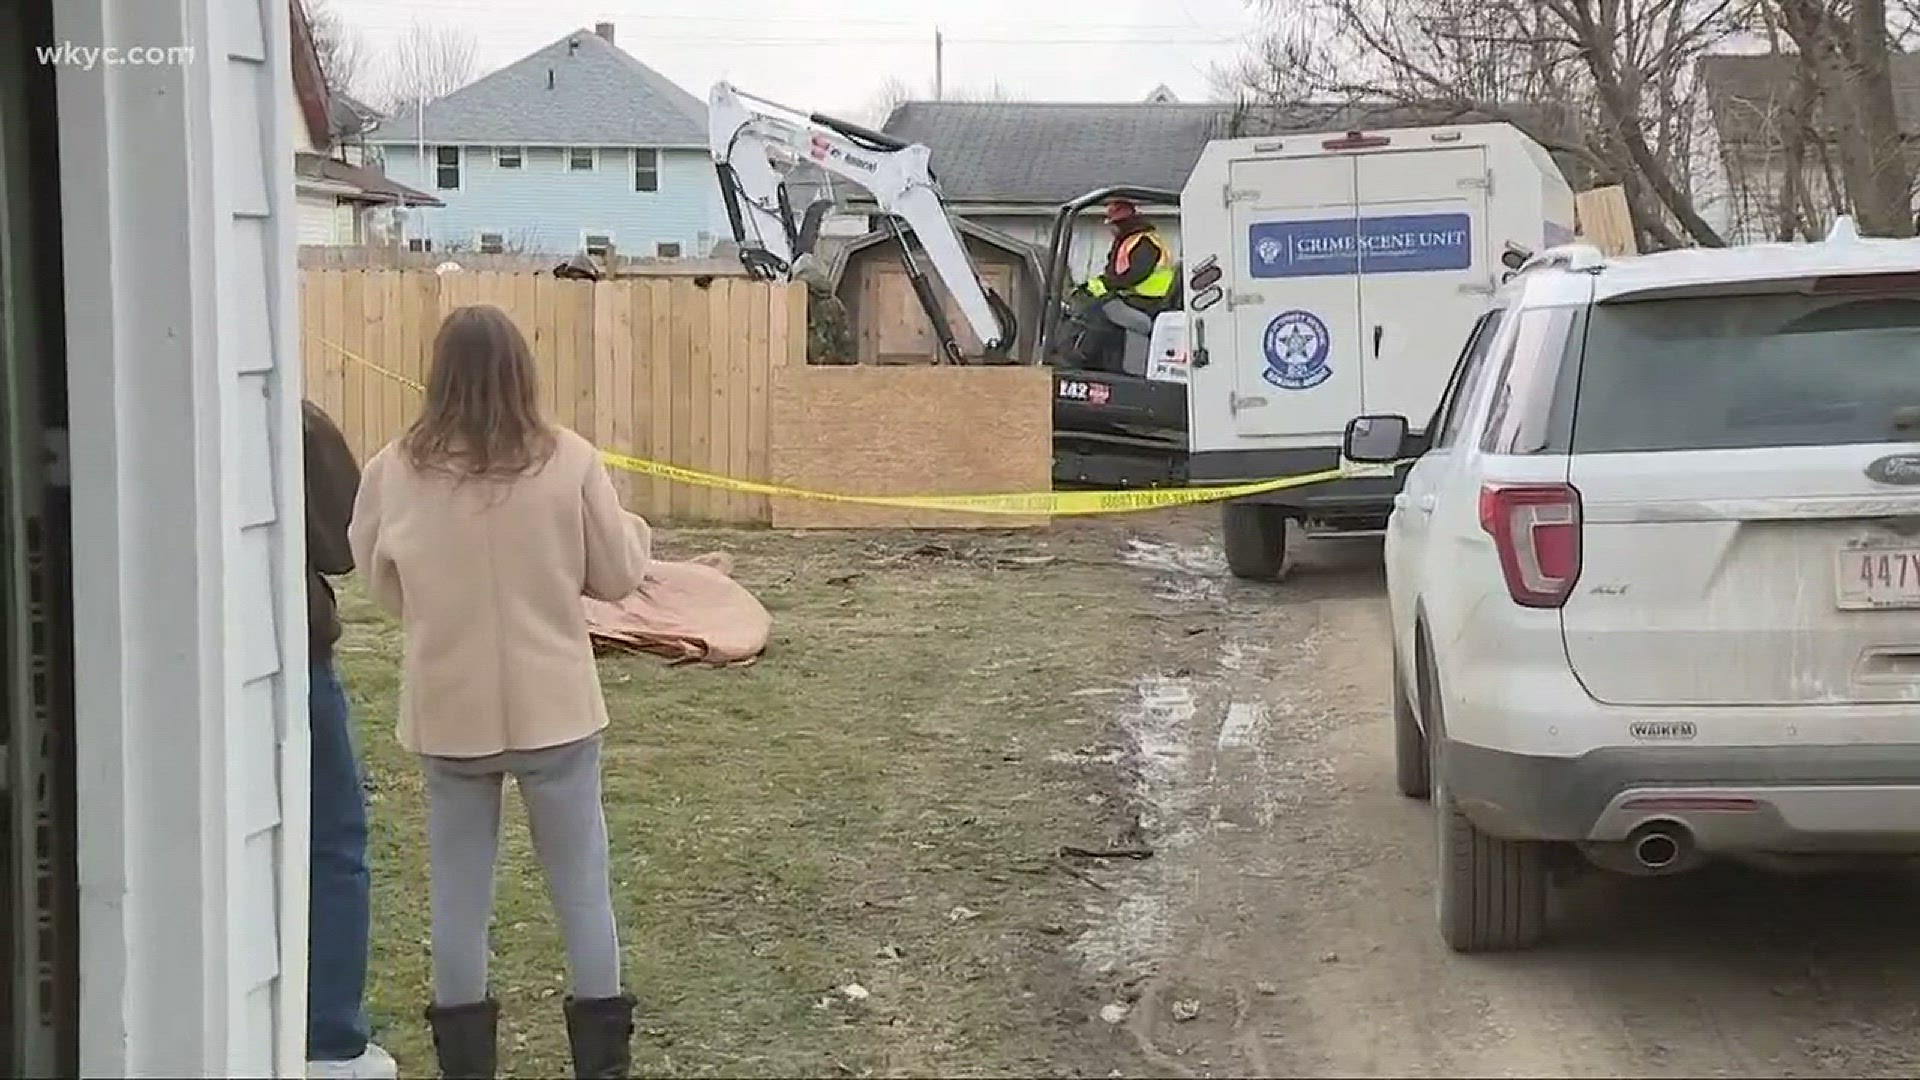 Body in container buried in Massillon yard